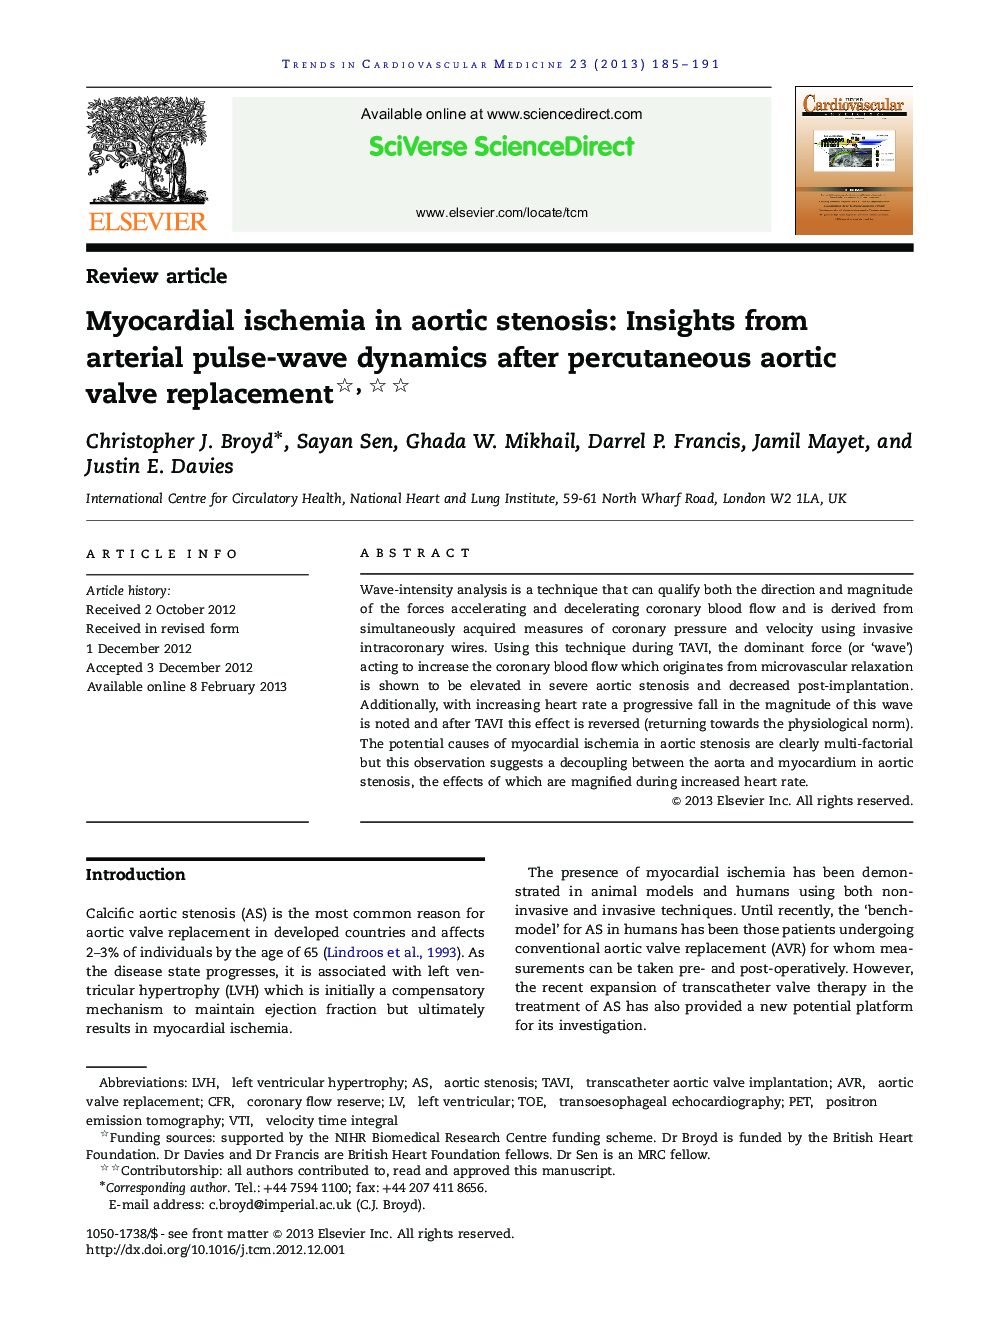 Myocardial ischemia in aortic stenosis: Insights from arterial pulse-wave dynamics after percutaneous aortic valve replacement 